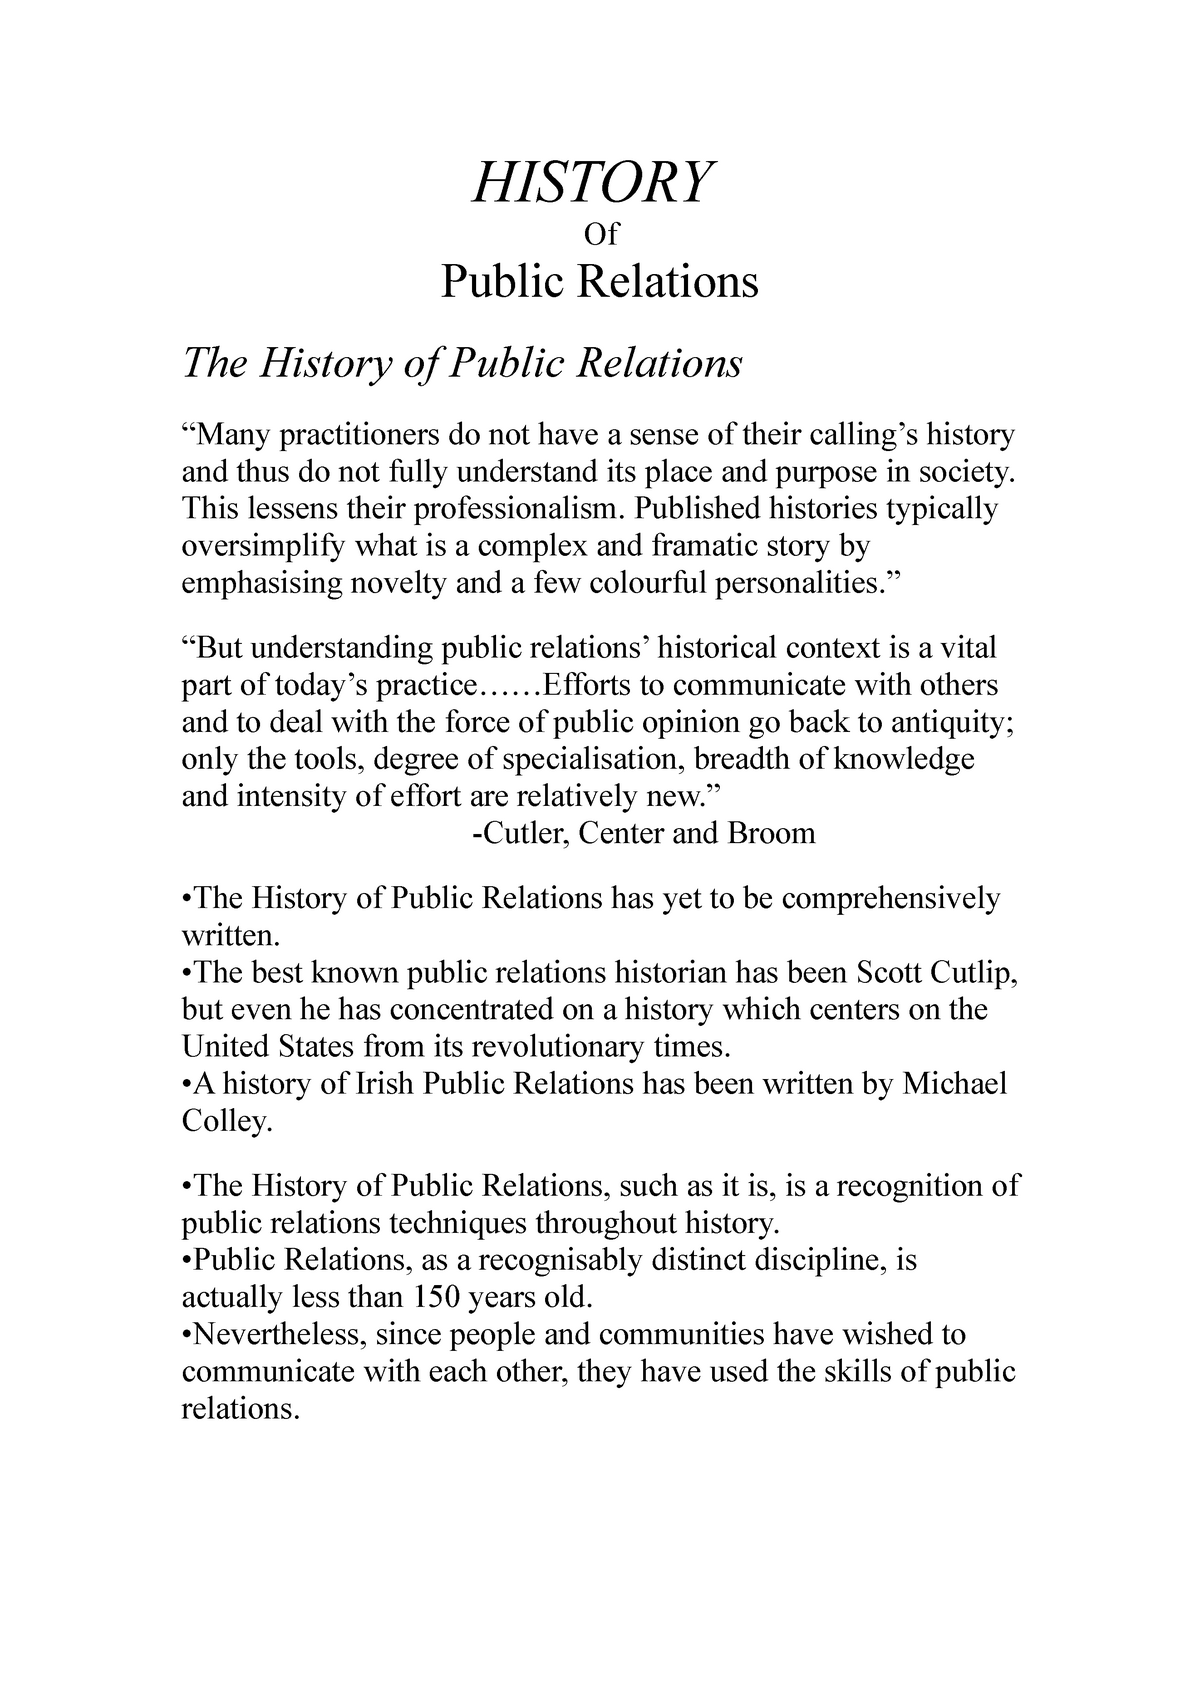 public relations history research paper